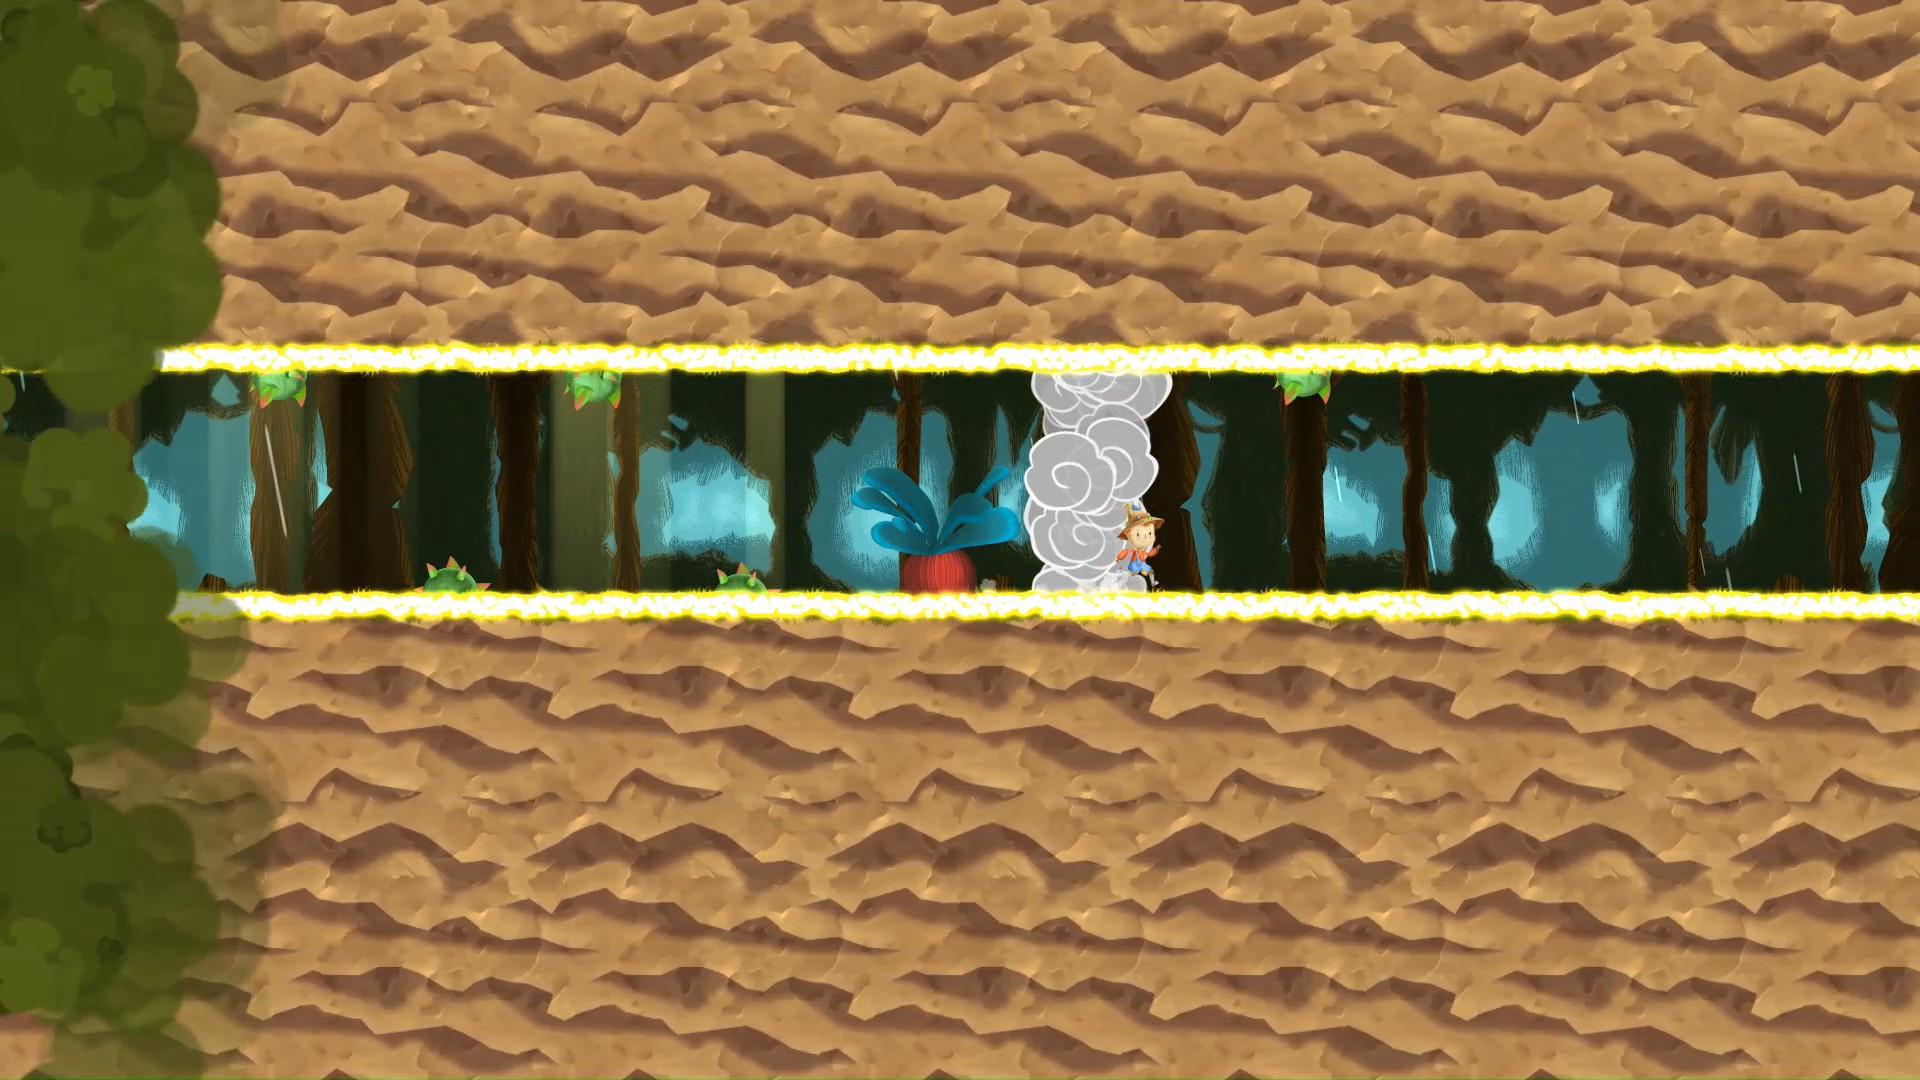 Screenshot №6 from game Upside Down